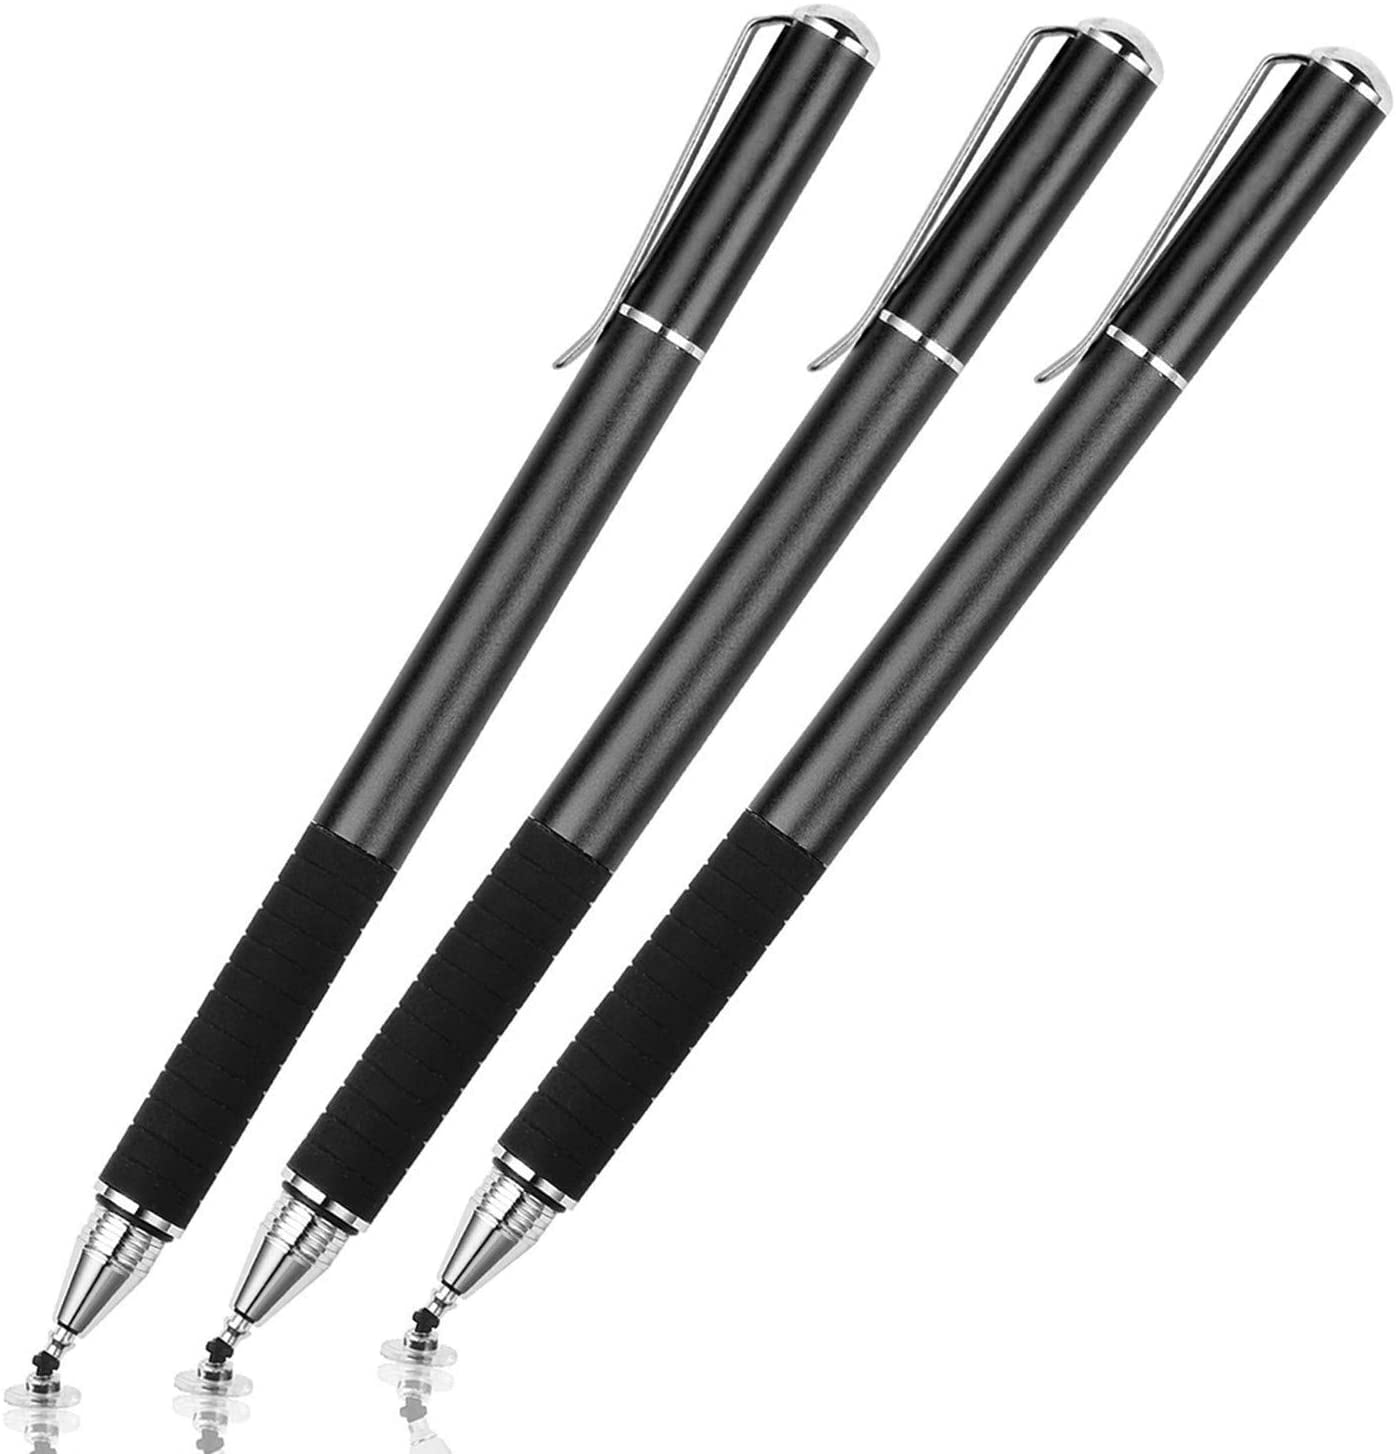 6-Pack 2-in-1 Crystal Stylus And Ink Pen for iPhone iPad,Android Smartphone 